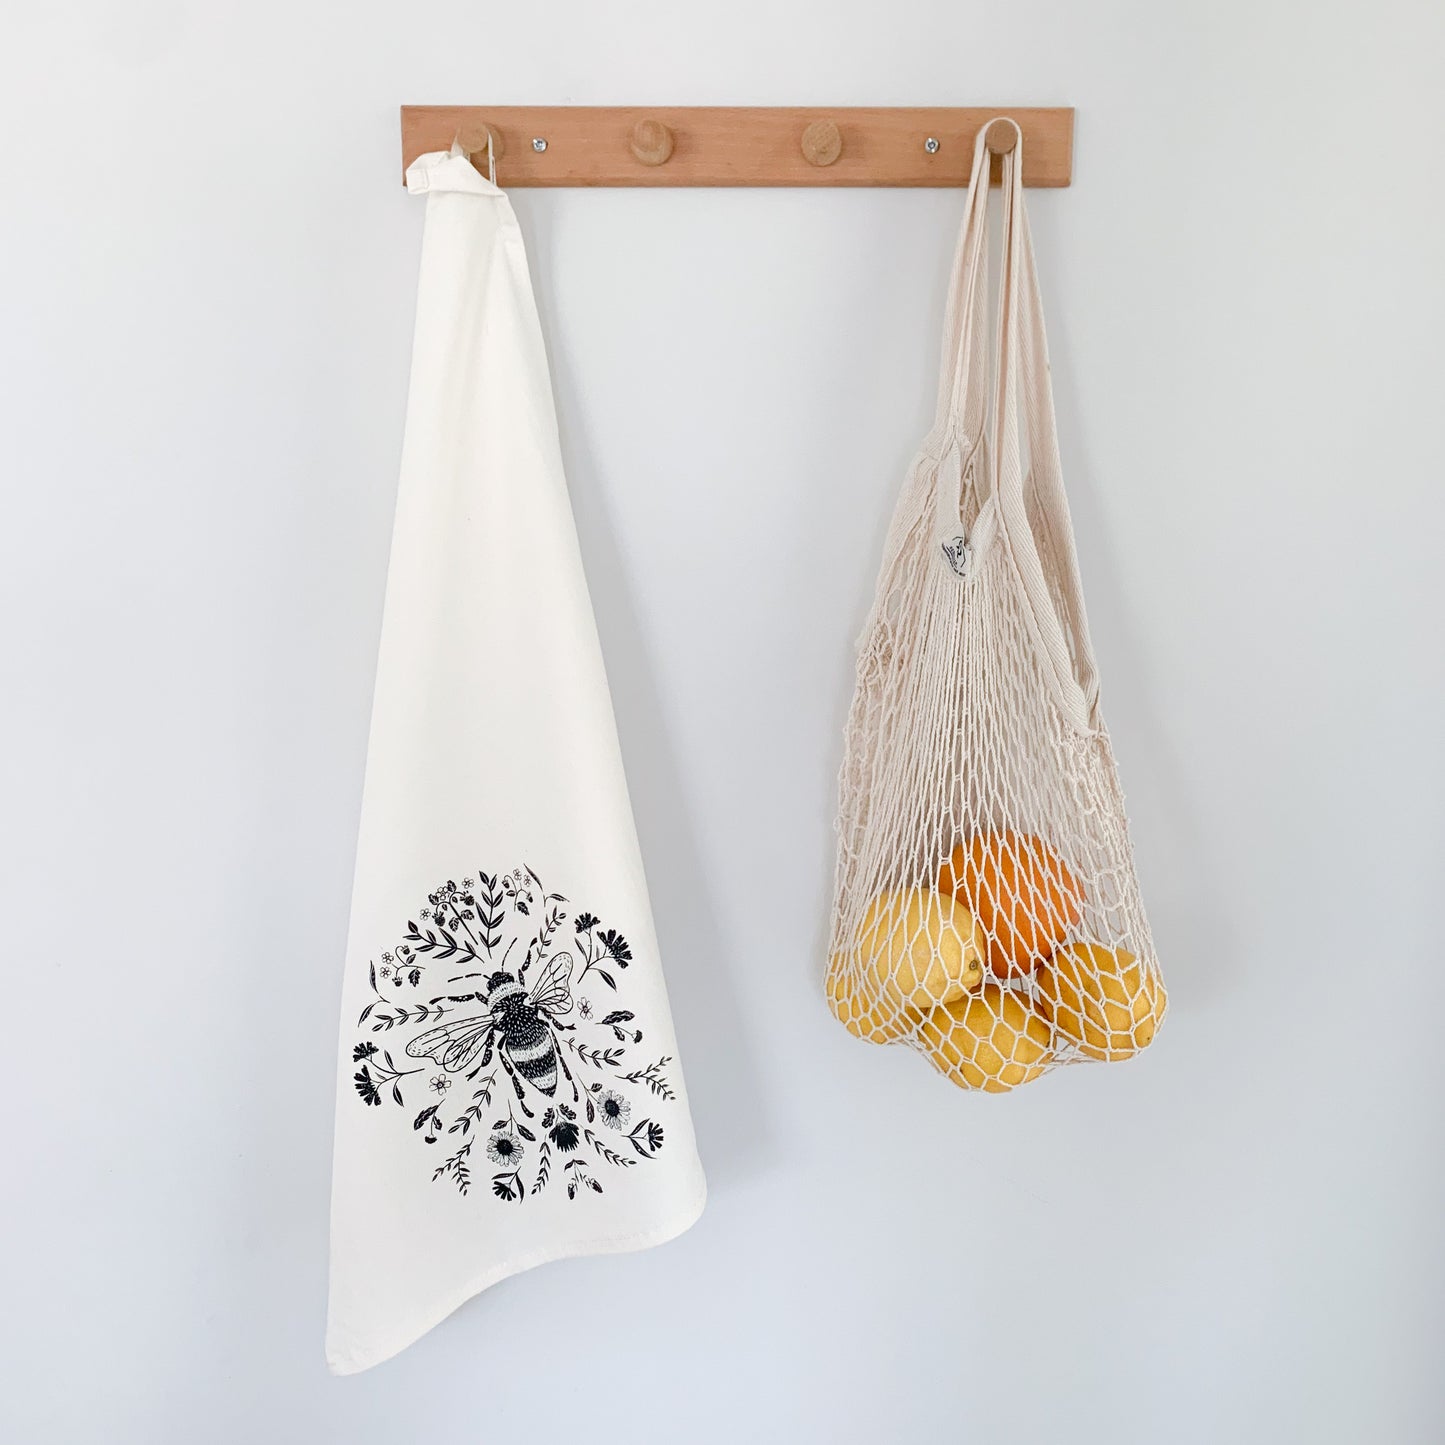 Bee Tea Towel hanging on a wood coat rack beside a cotton net tote bag which is filled with lemons and oranges.  - Kinsfolk Shop